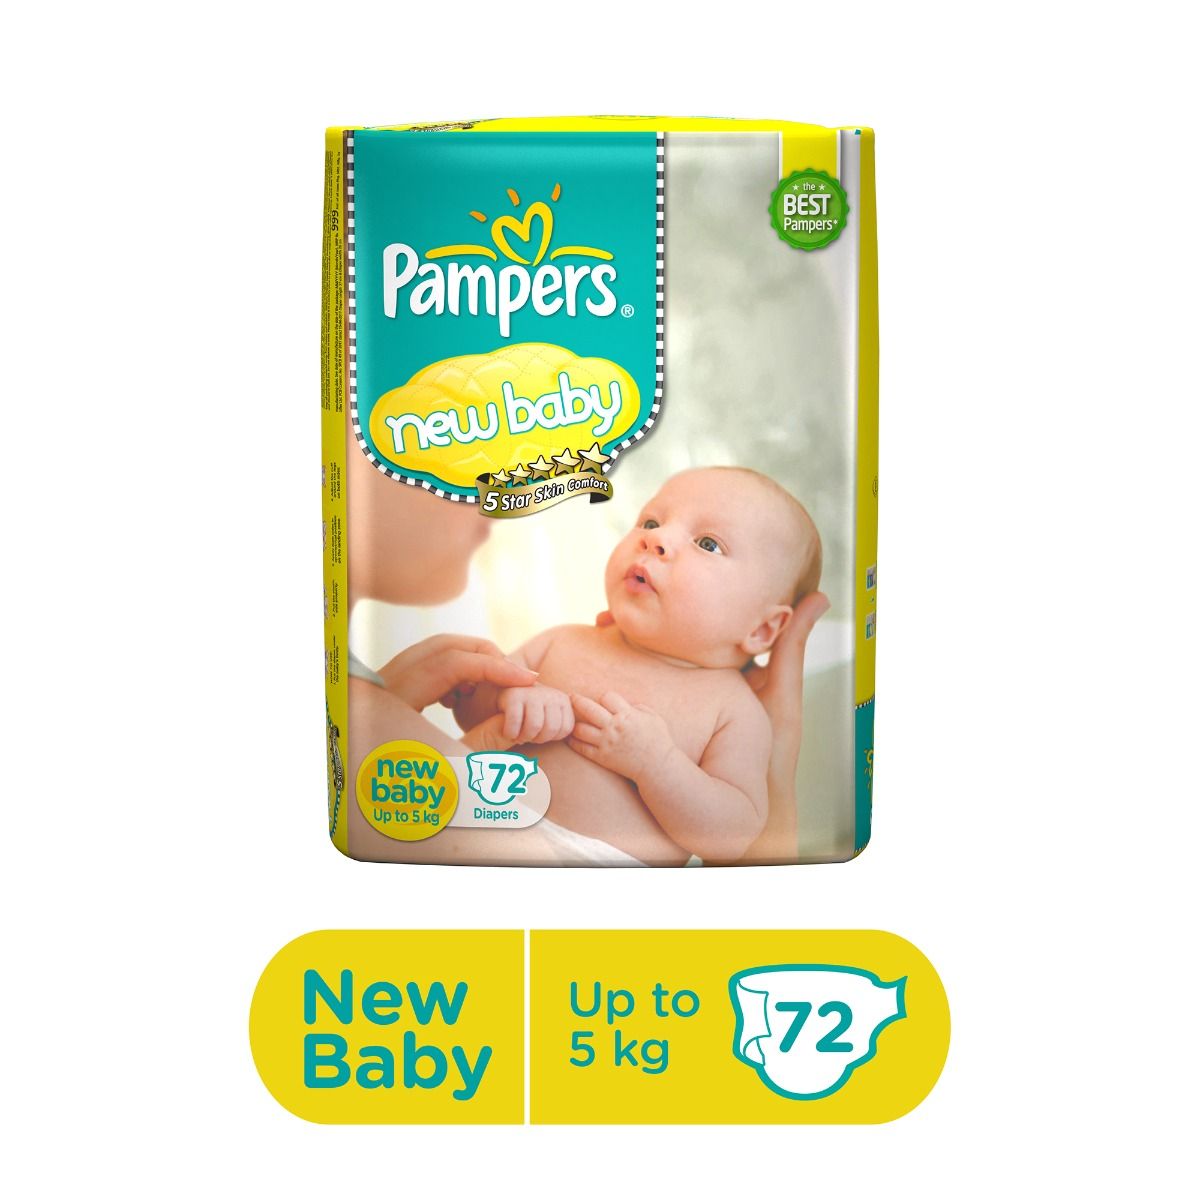 Buy Pampers New Baby Diapers, 72 Count Online